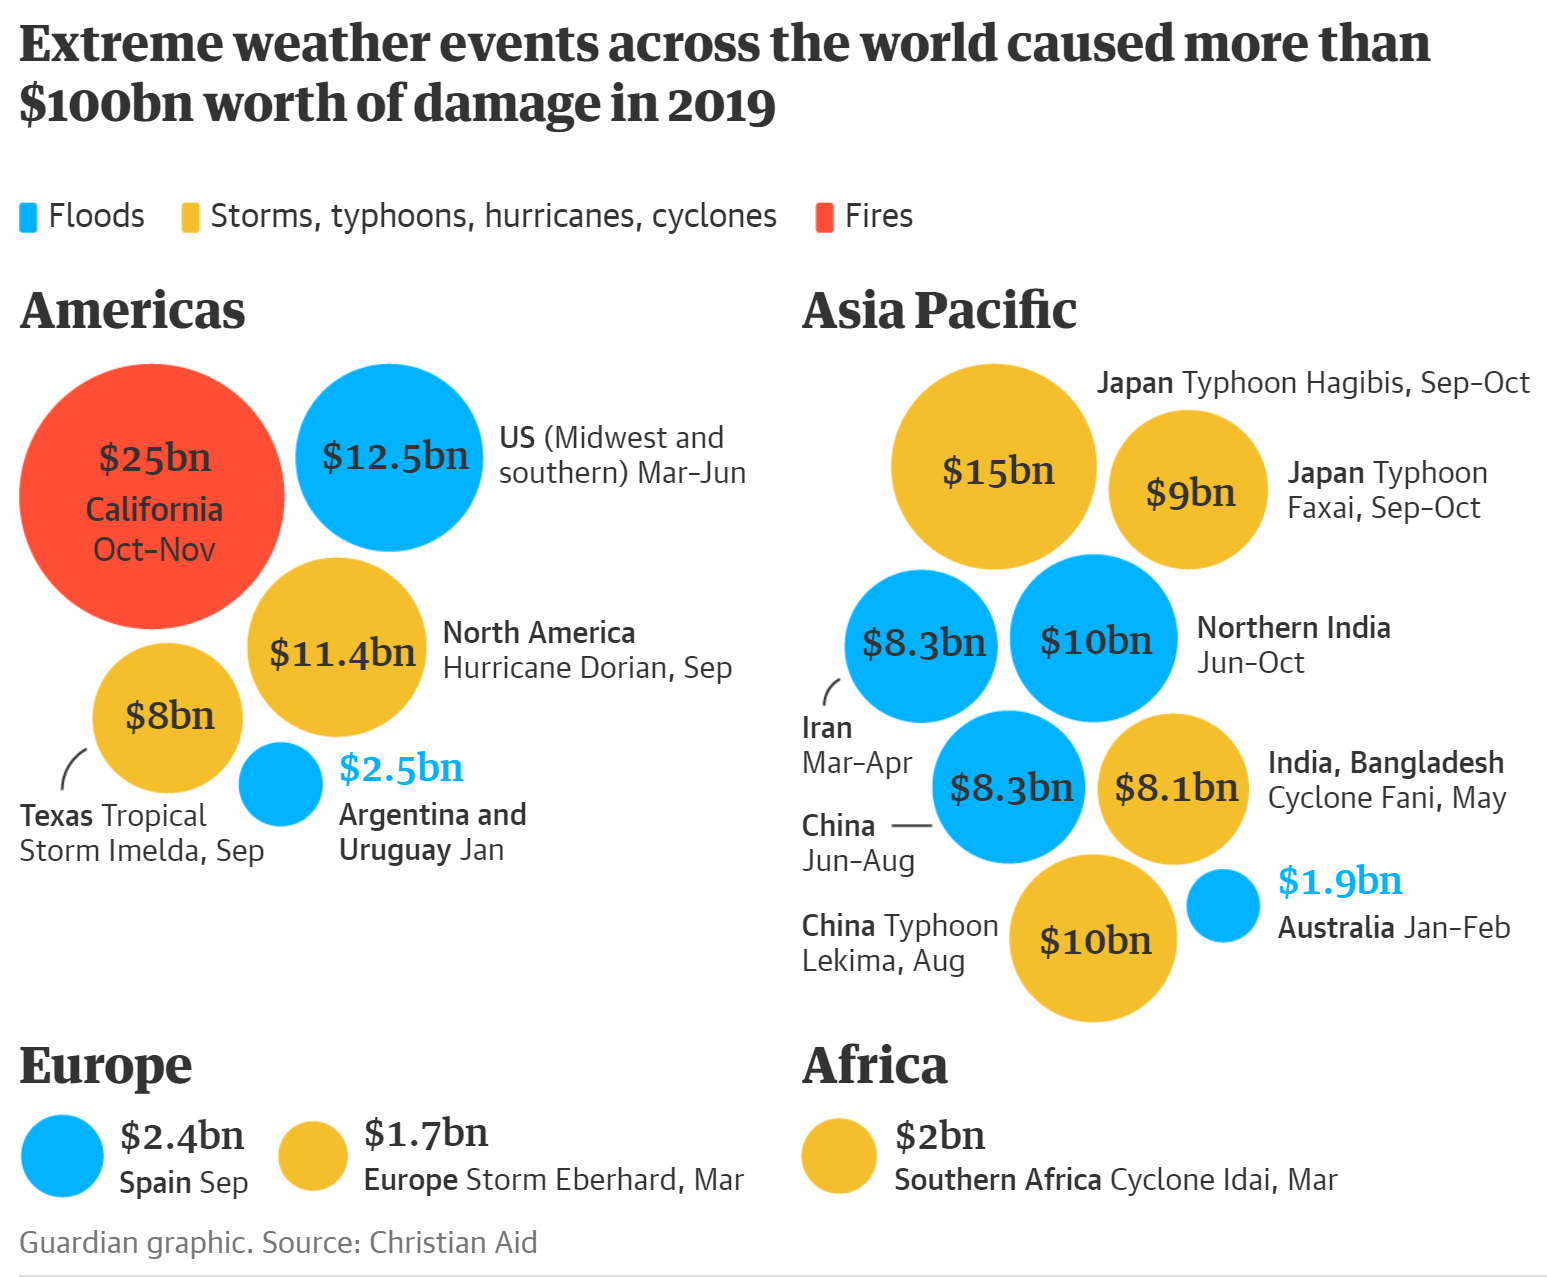 Extreme weather events across the world caused more than $100 billion worth of damage in 2019. The most financially costly disasters were wildfires in California, which caused $25 billion in damage, followed by Typhoon Hagibis in Japan ($15 billion) and floods in the American mid-west ($12.5 billion) and China ($12 billion). The events with the greatest loss of life were floods in Northern India which killed 1,900 and Cyclone Idai which killed 1,300. Data: Christian Aid. Graphic: The Guardian